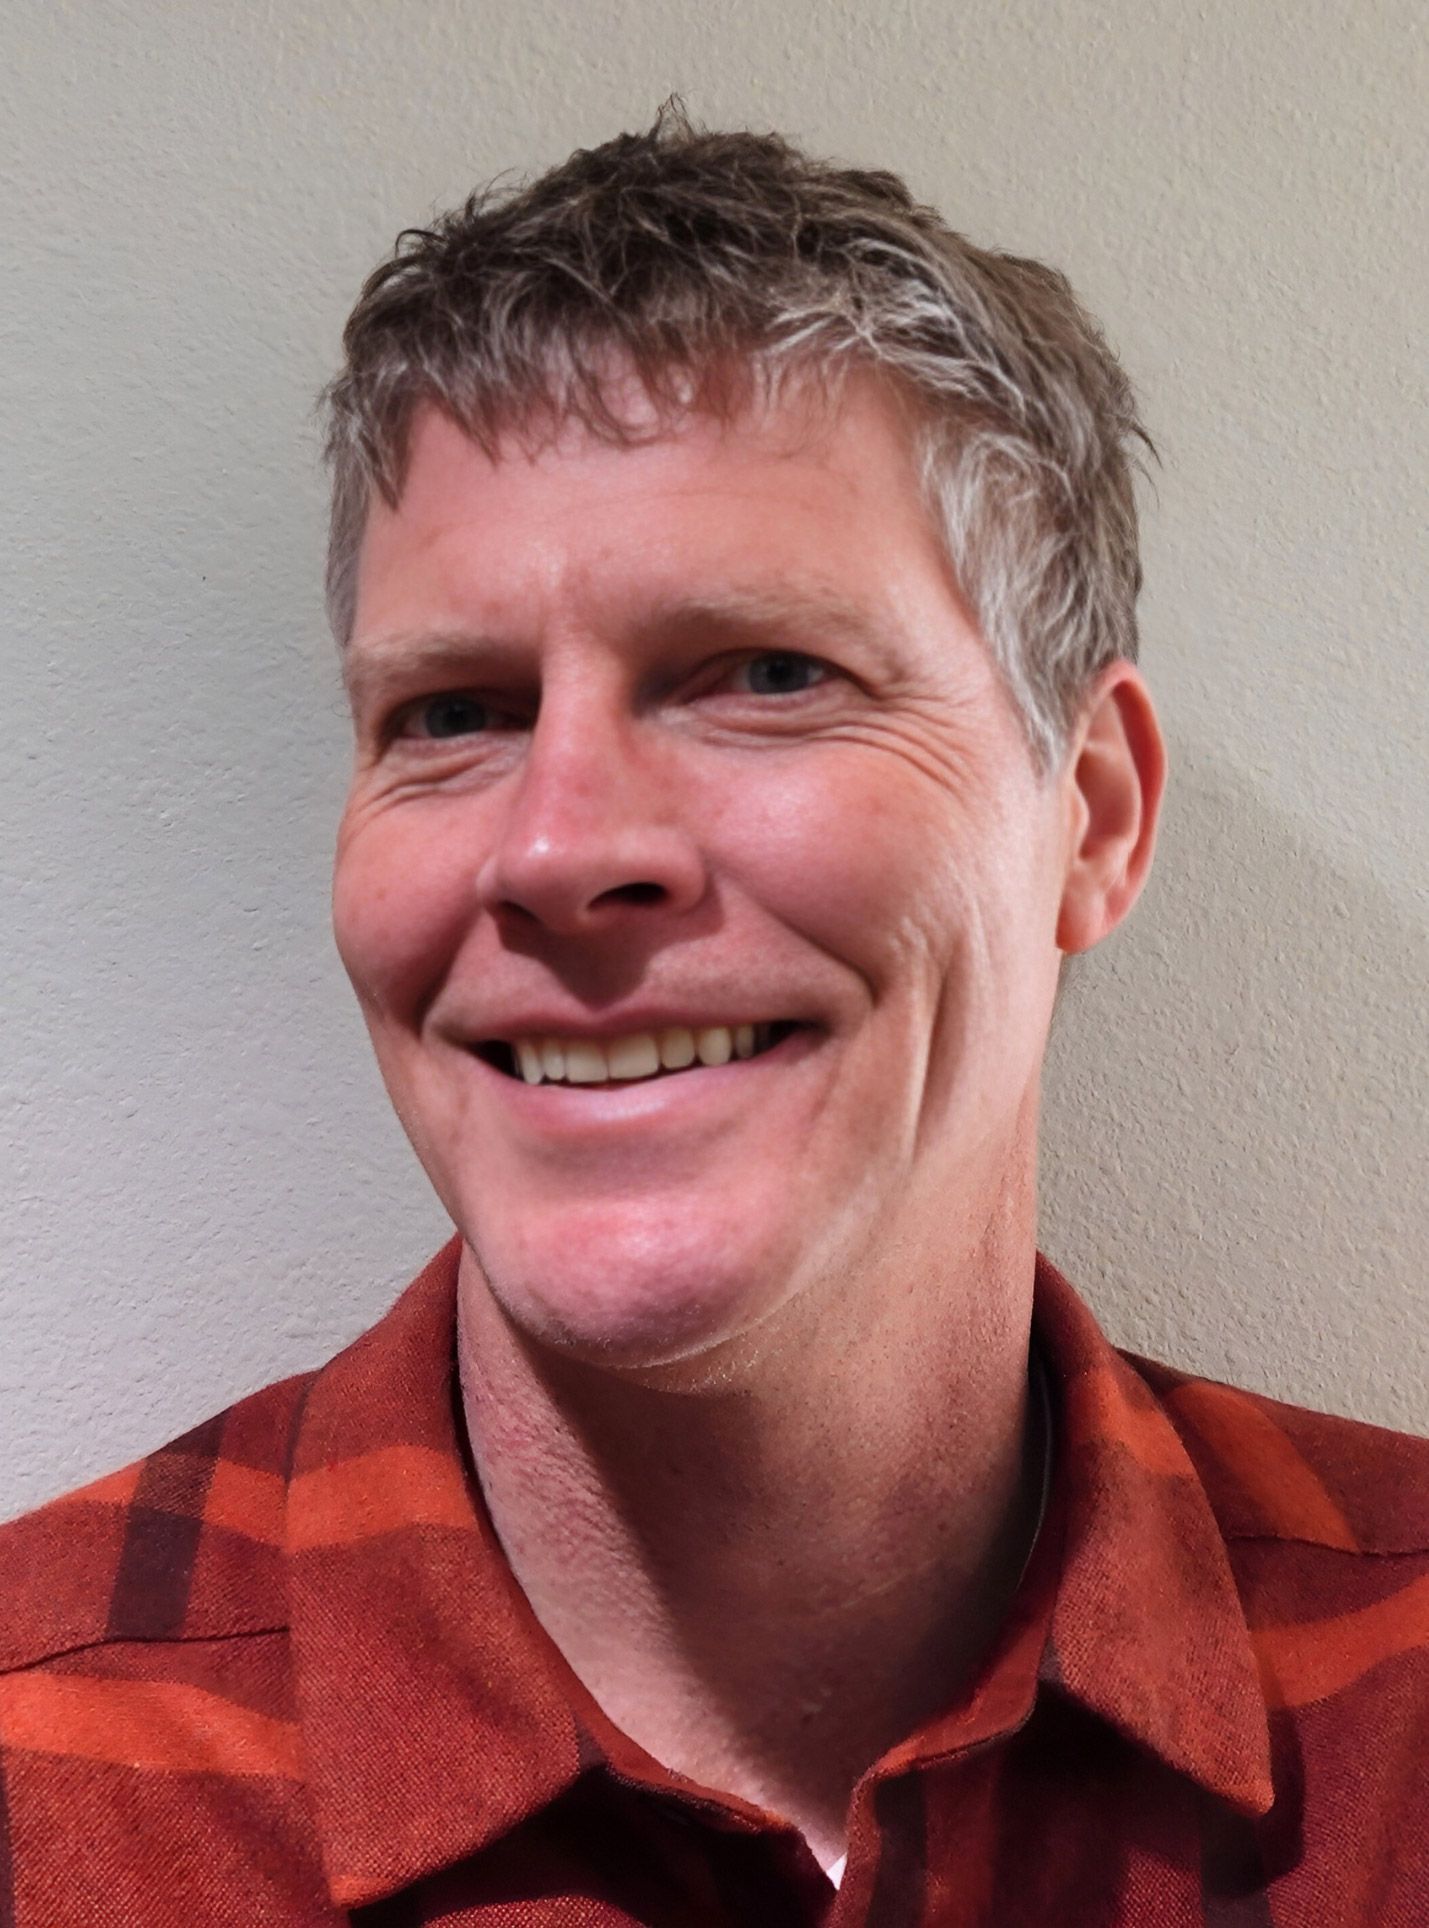 A man wearing an orange plaid shirt is smiling for the camera